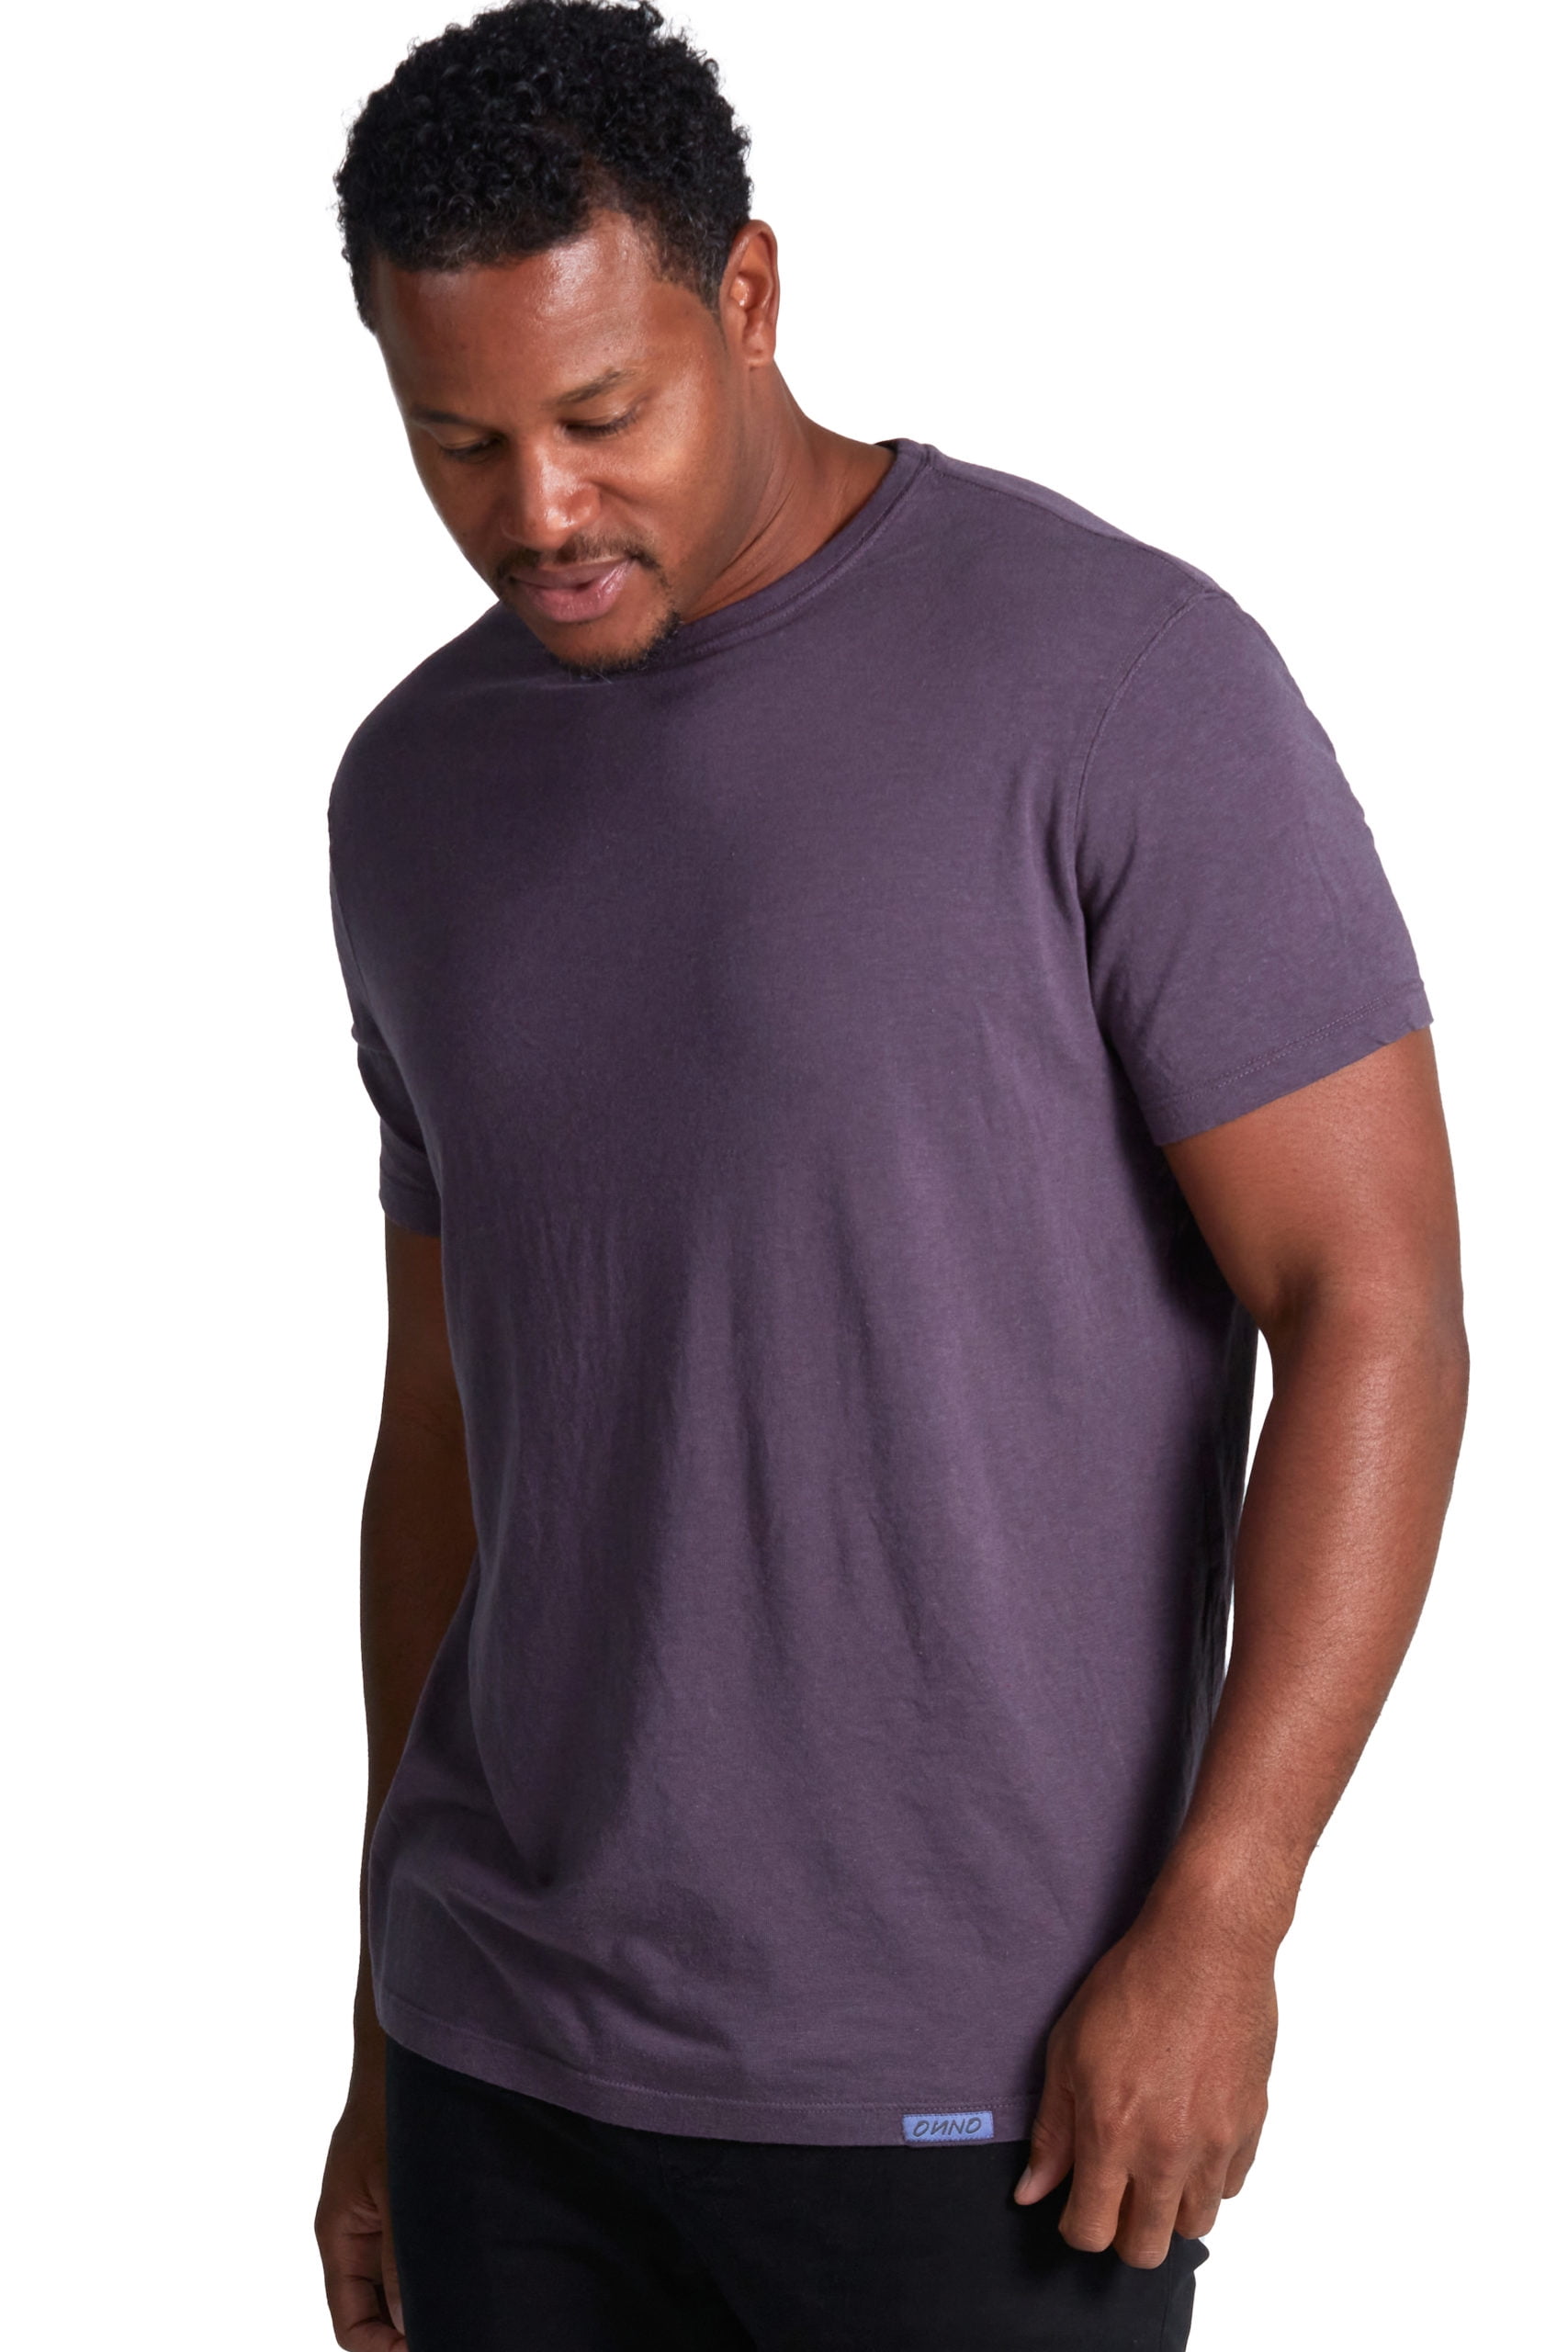 ONNO bamboo t-shirts | Made to Move®